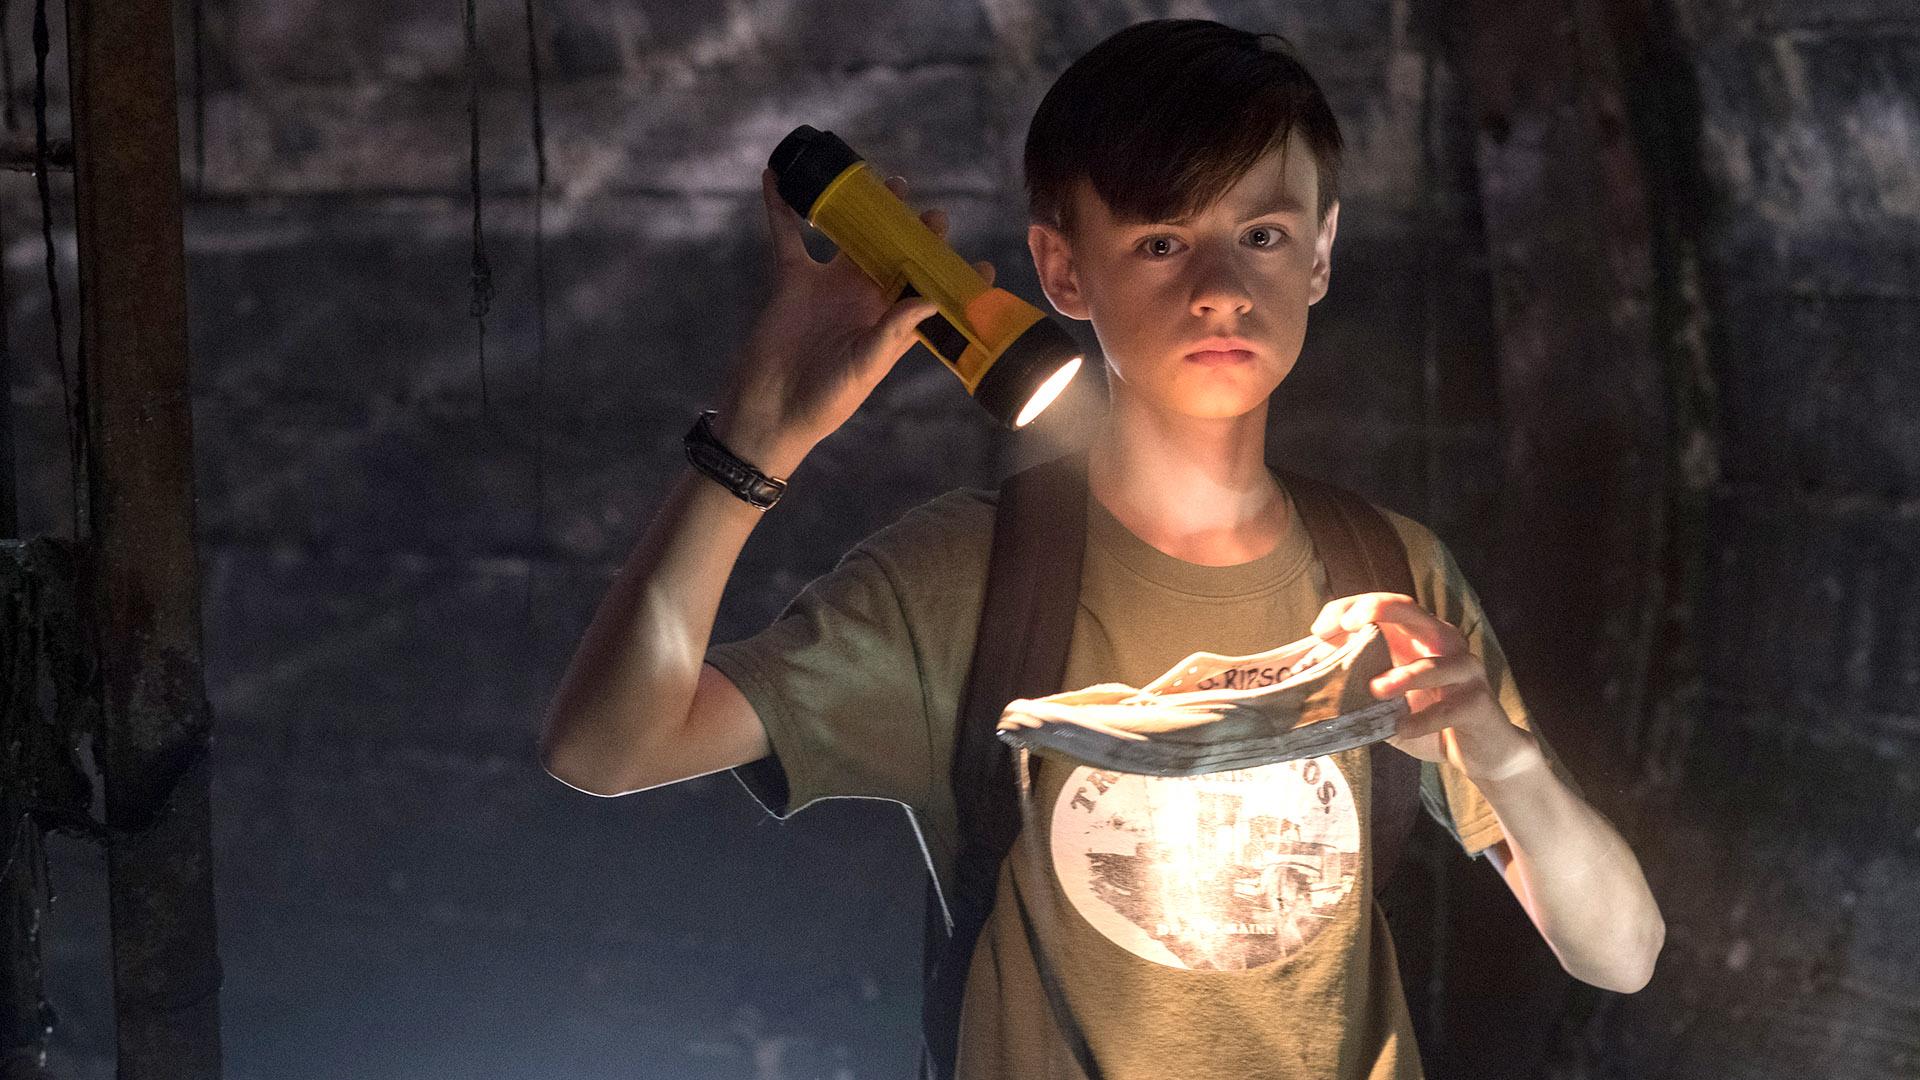 The 6 questions the It movie Chapter 2 has to answer